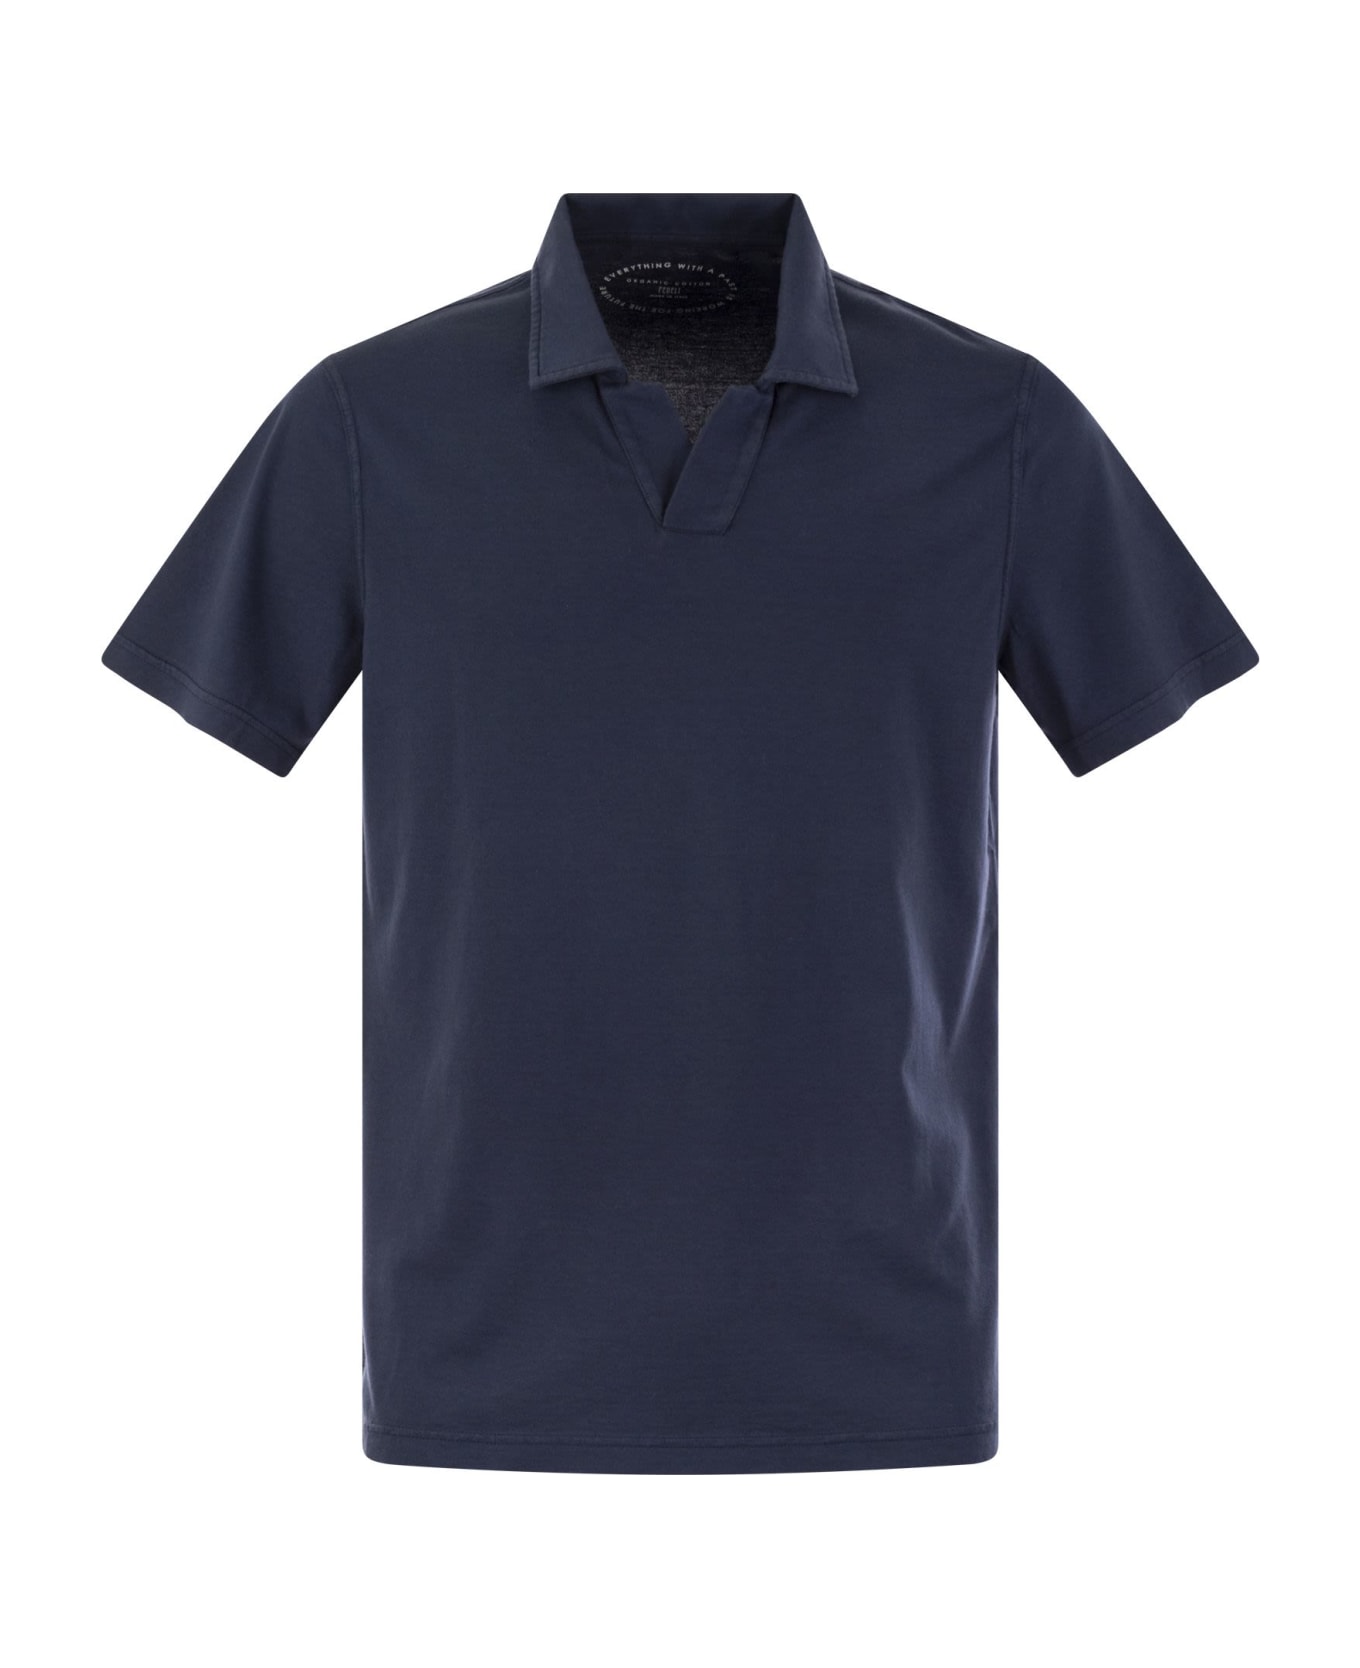 Fedeli Cotton Polo Shirt With Open Collar - Blue ポロシャツ